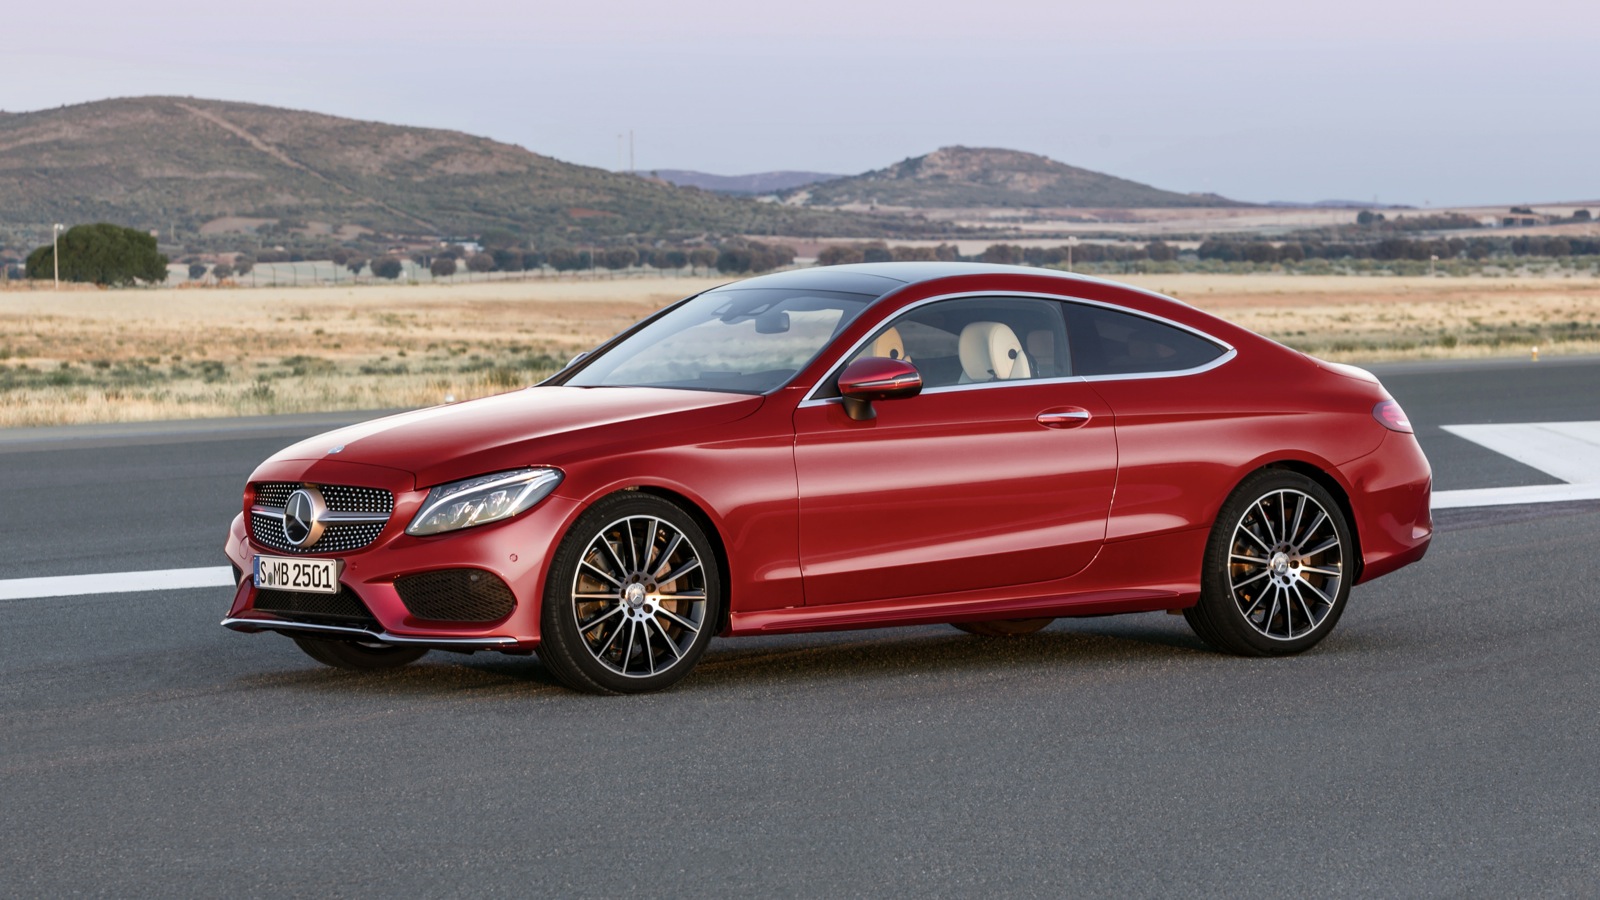 Mercedes benz c class coupe price south africa #1